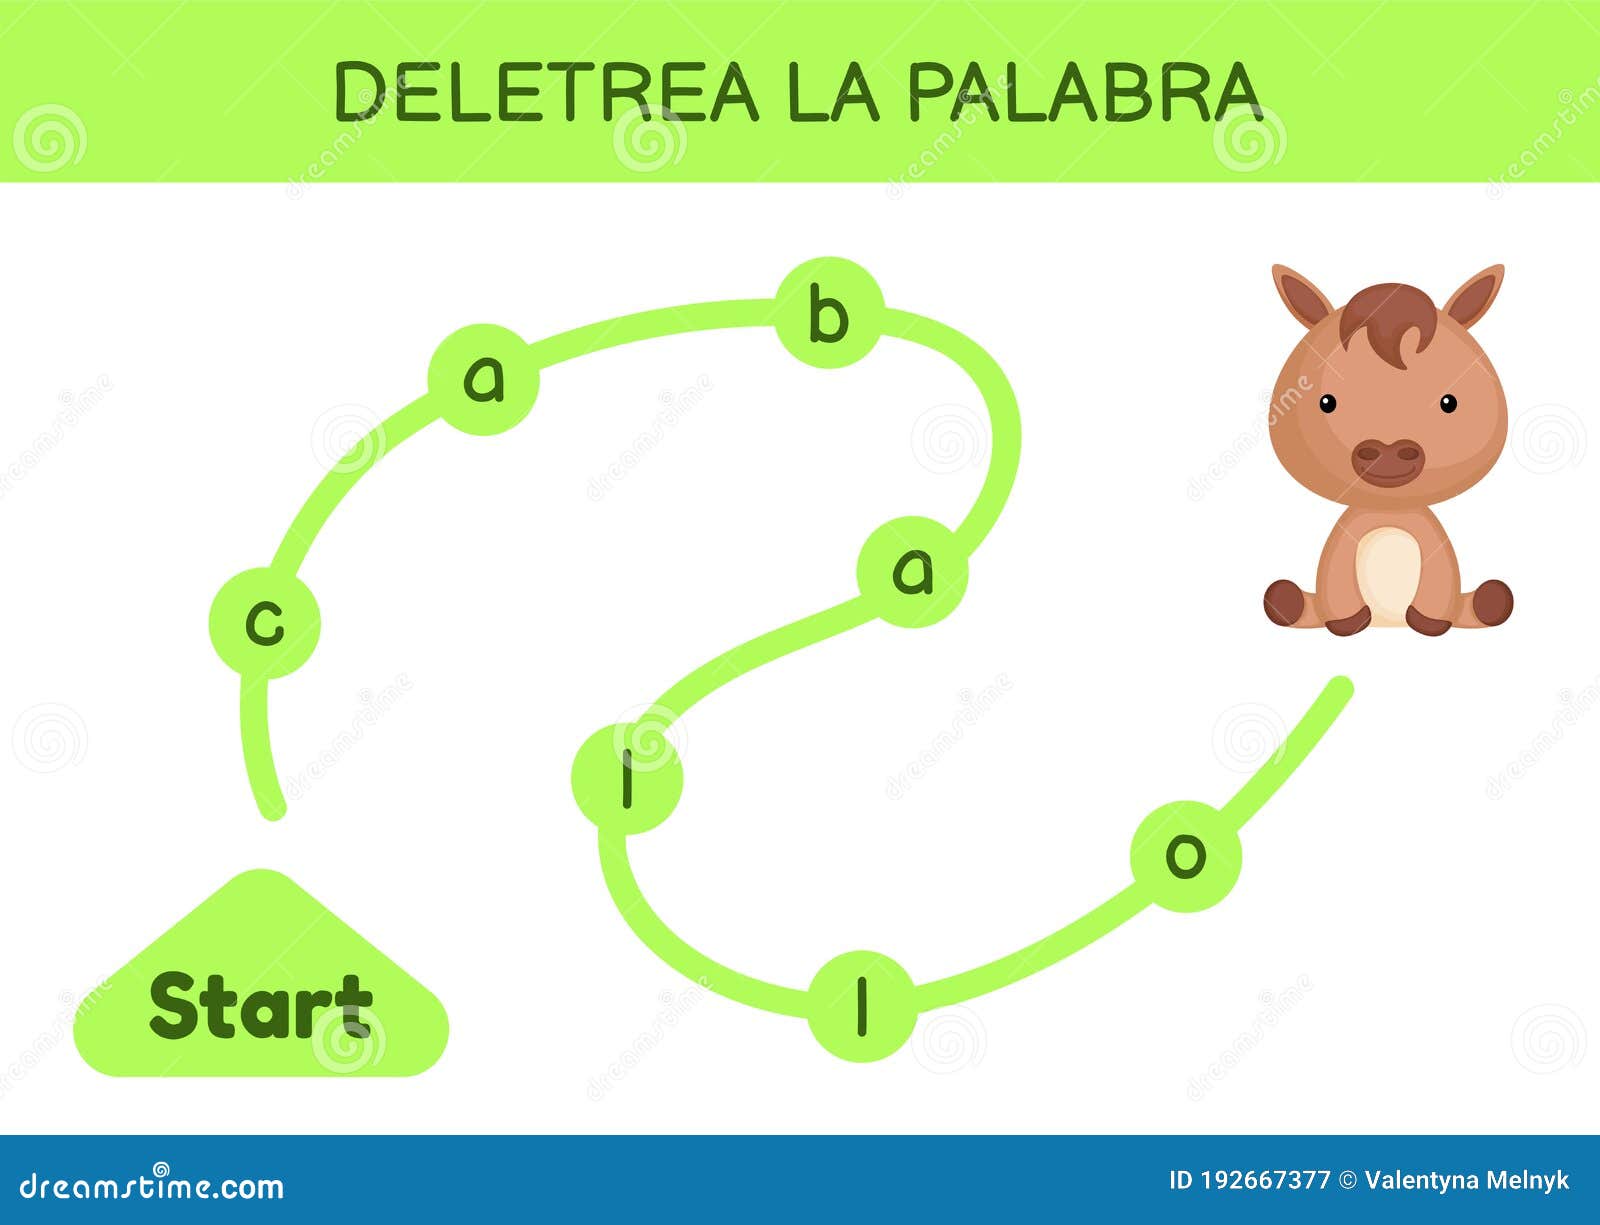 deletrea la palabra - spell the word. maze for kids. spelling word game template. learn to read word horse. activity page for